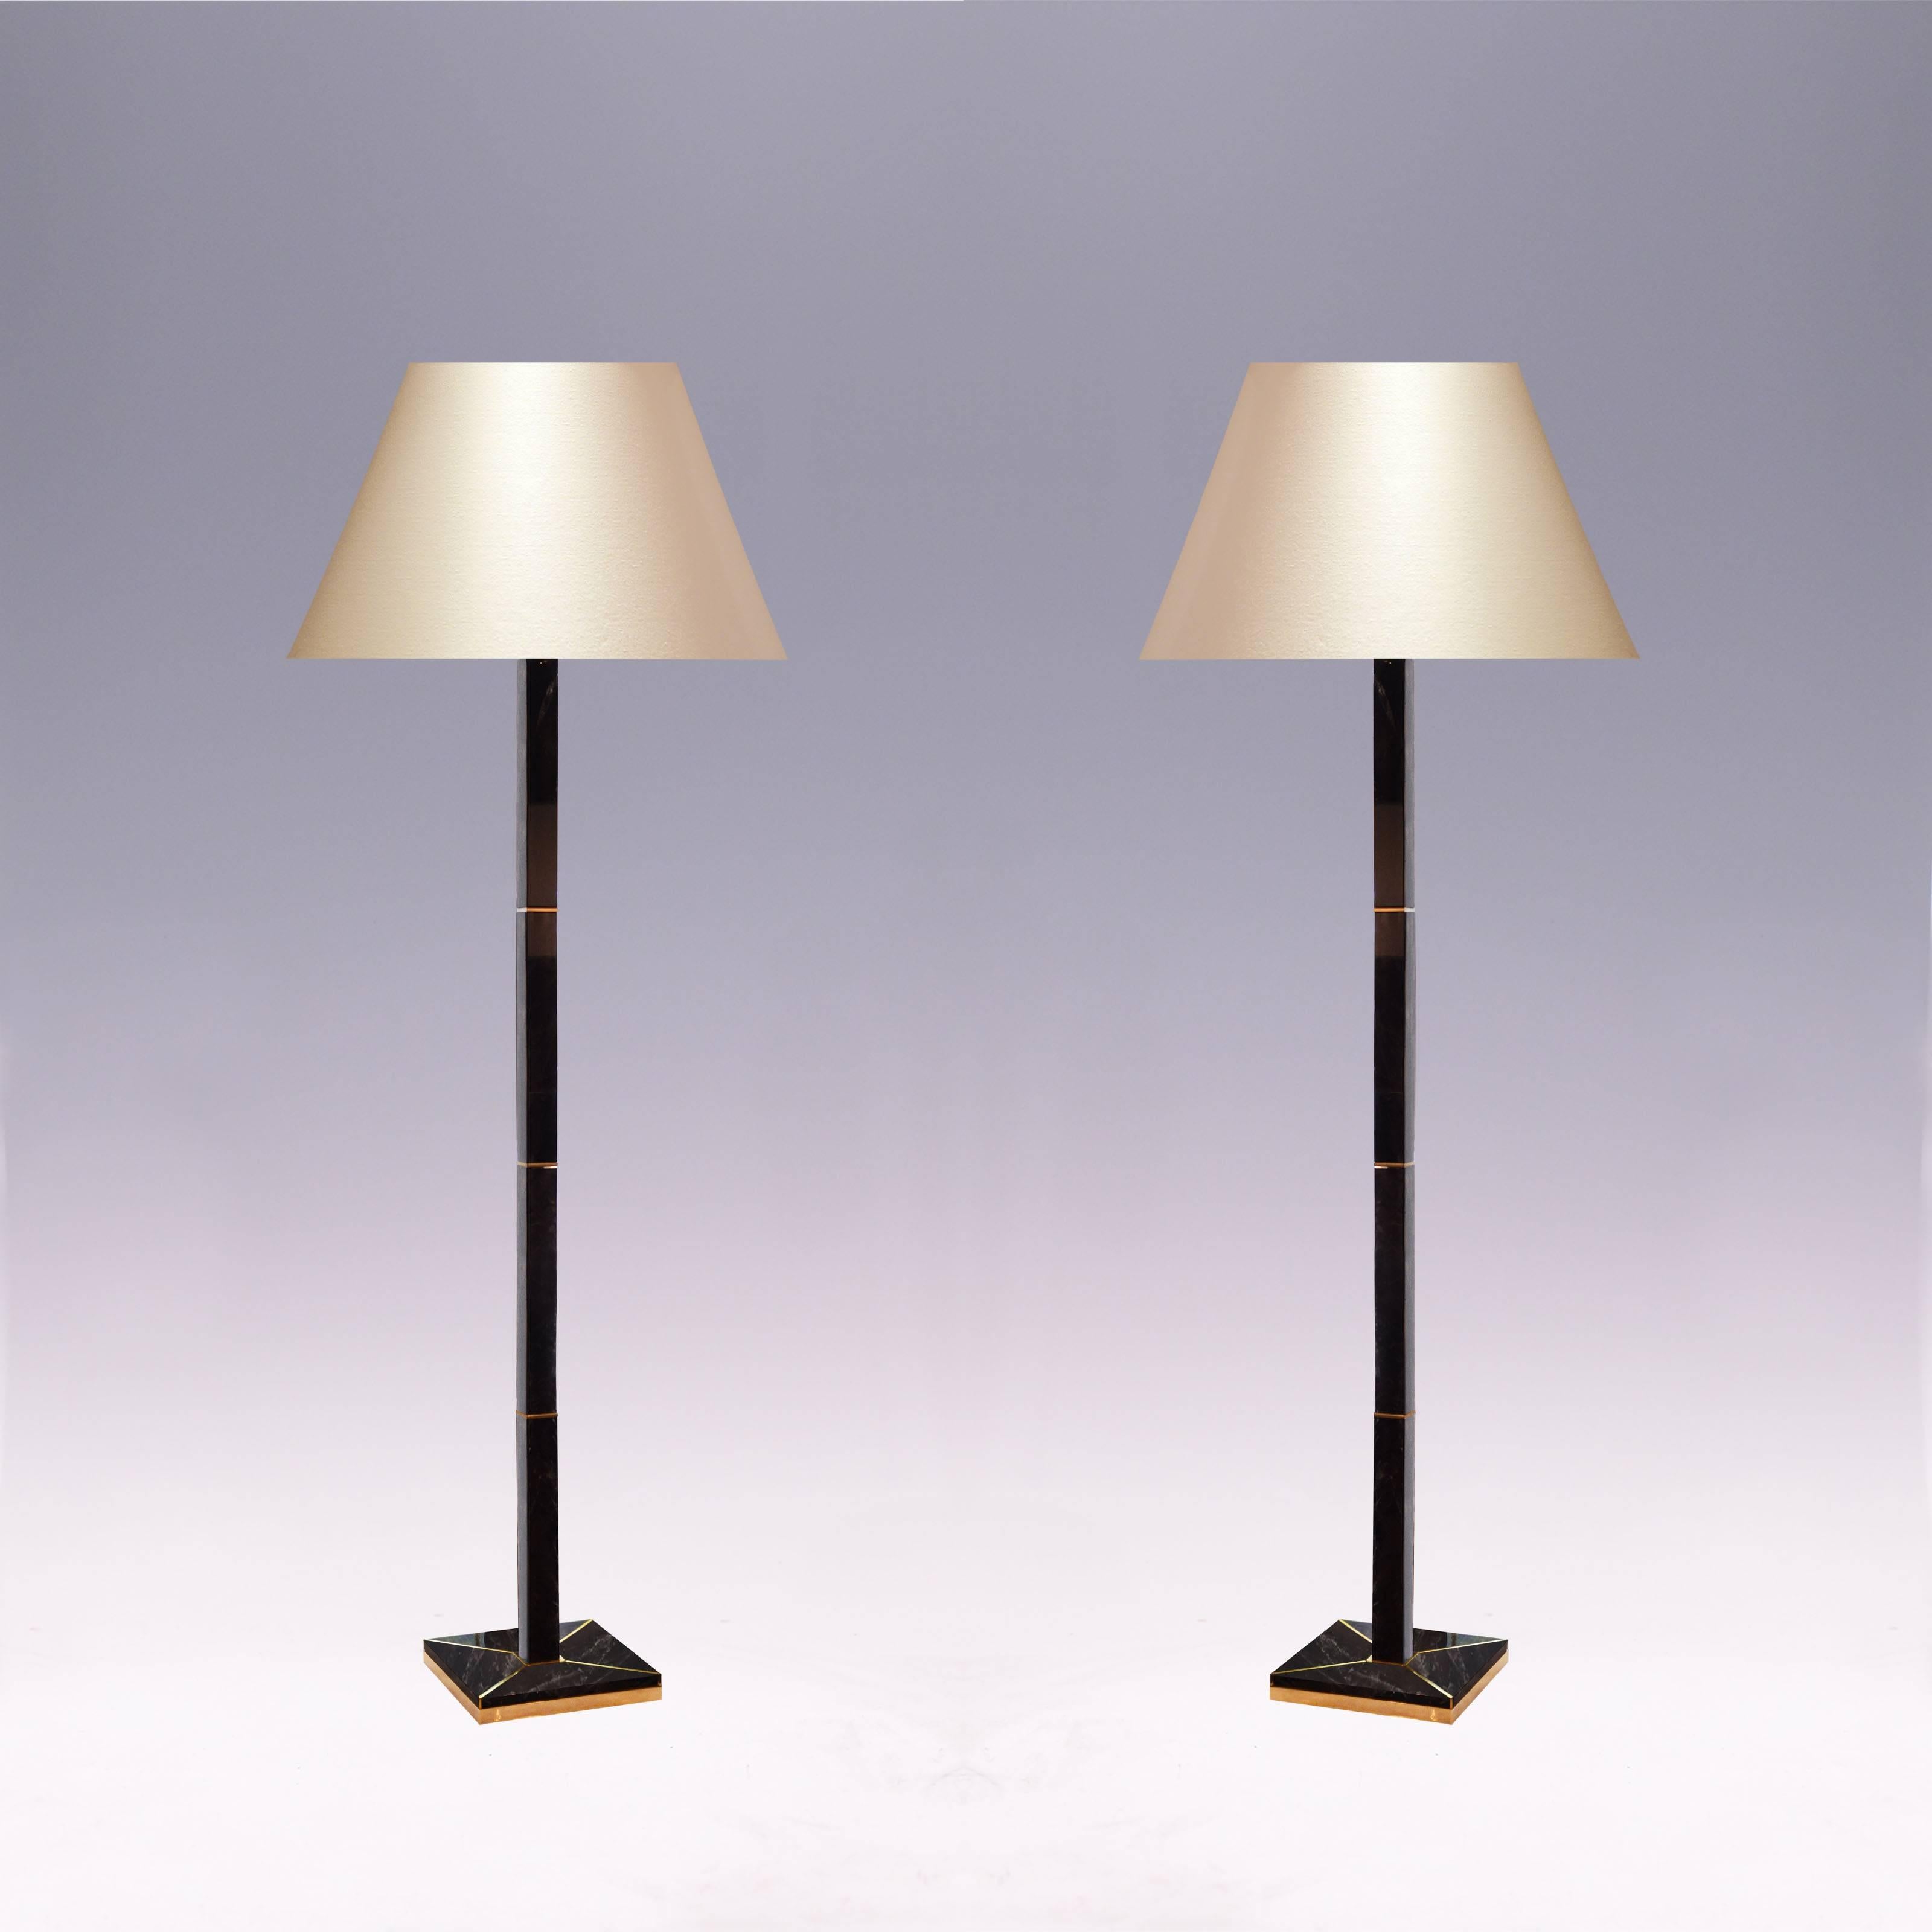 Pair of modern elegant dark brown rock crystal floor lamps with brass plating base, created by Phoenix Gallery, NYC.
Available in nickel plating metal finish.
(Lampshade not included). 
 